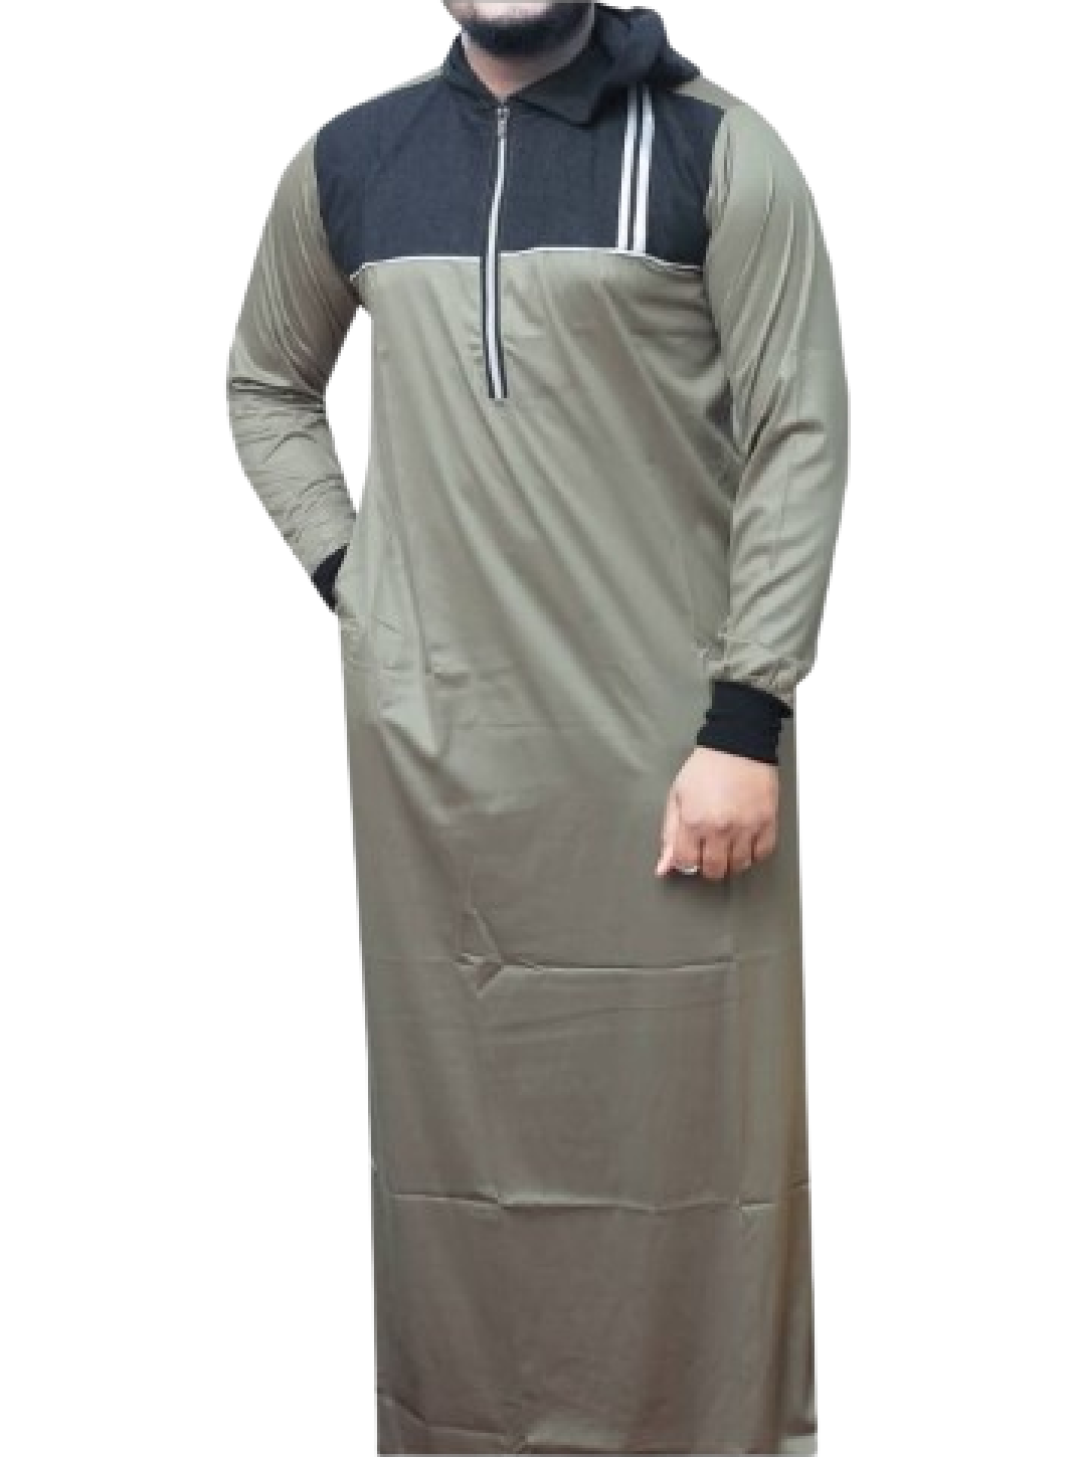 HOODED TUNIC KANZU FOR MEN,SAGE GREEN, ISLAMIC OR MUSLIM CLOTHING COLLECTIONS, PRAYER ROBES, CHEST AND WRIST COLOUR PATTERNS,VARIED SIZES,LONG SLEEVED, NO CHEST POCKETS, ZIP LINE CHEST, MODESTY, SIMPLE AND CLASSY, FROM TURKEY